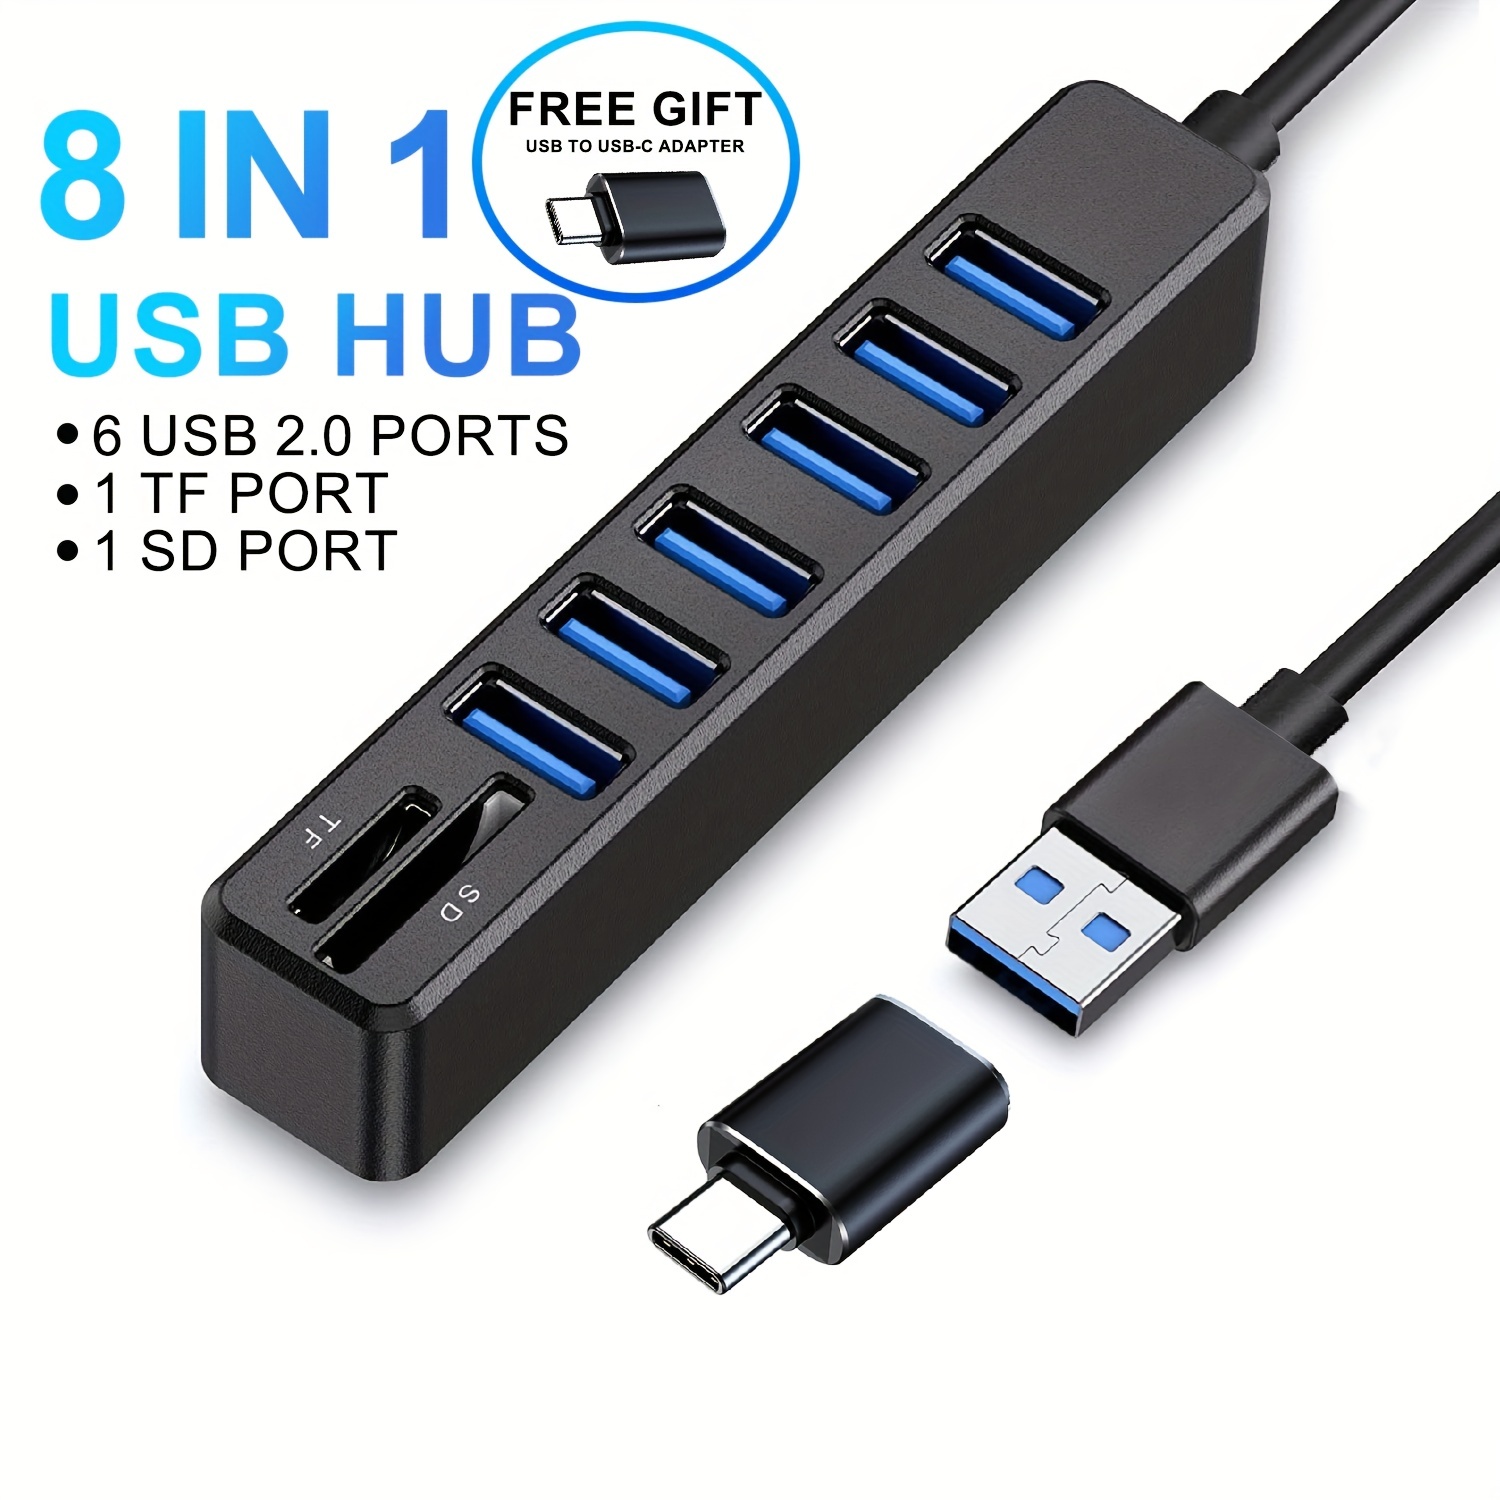 3 Port USB 3.0 Hub with Multi-In-1 Card Reader